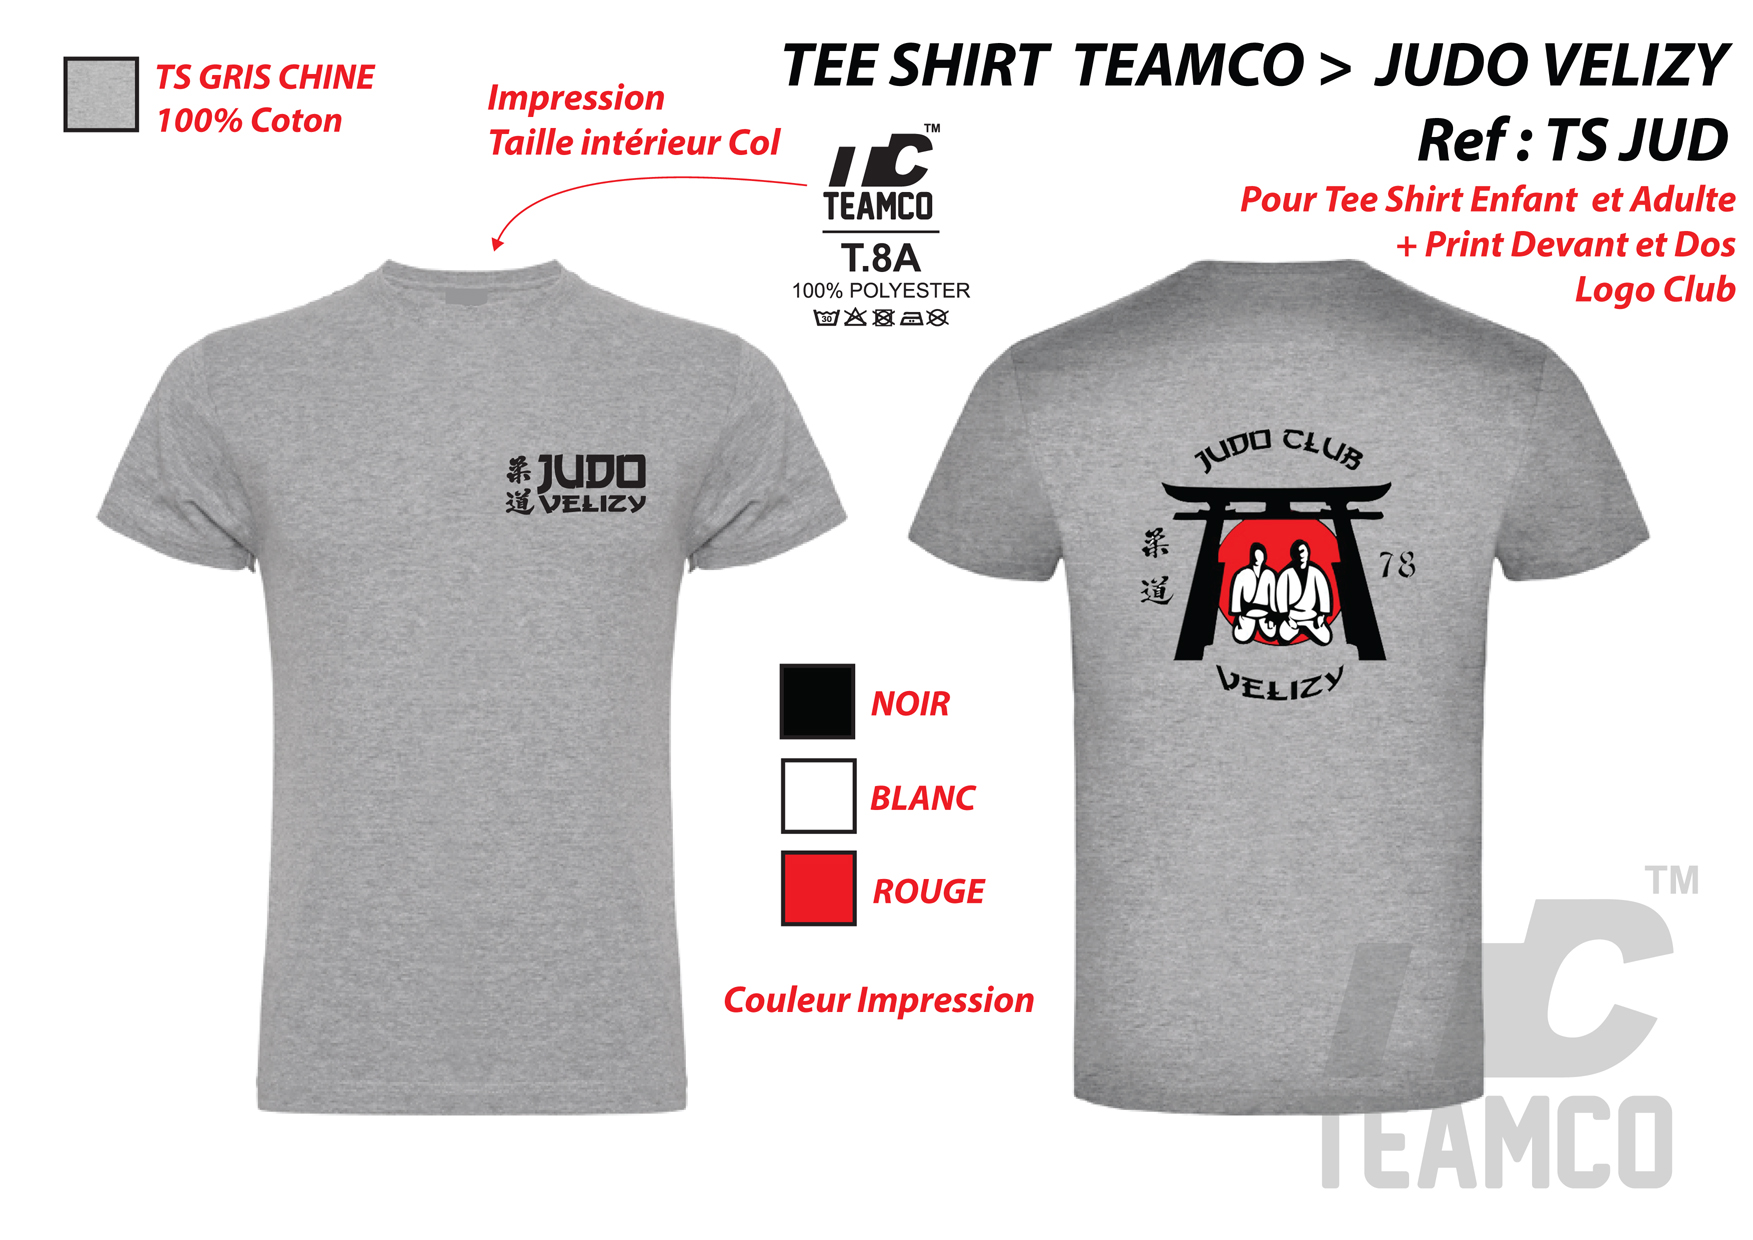 FT TEE SHIRT TEAMCO-JUDO VELIZY